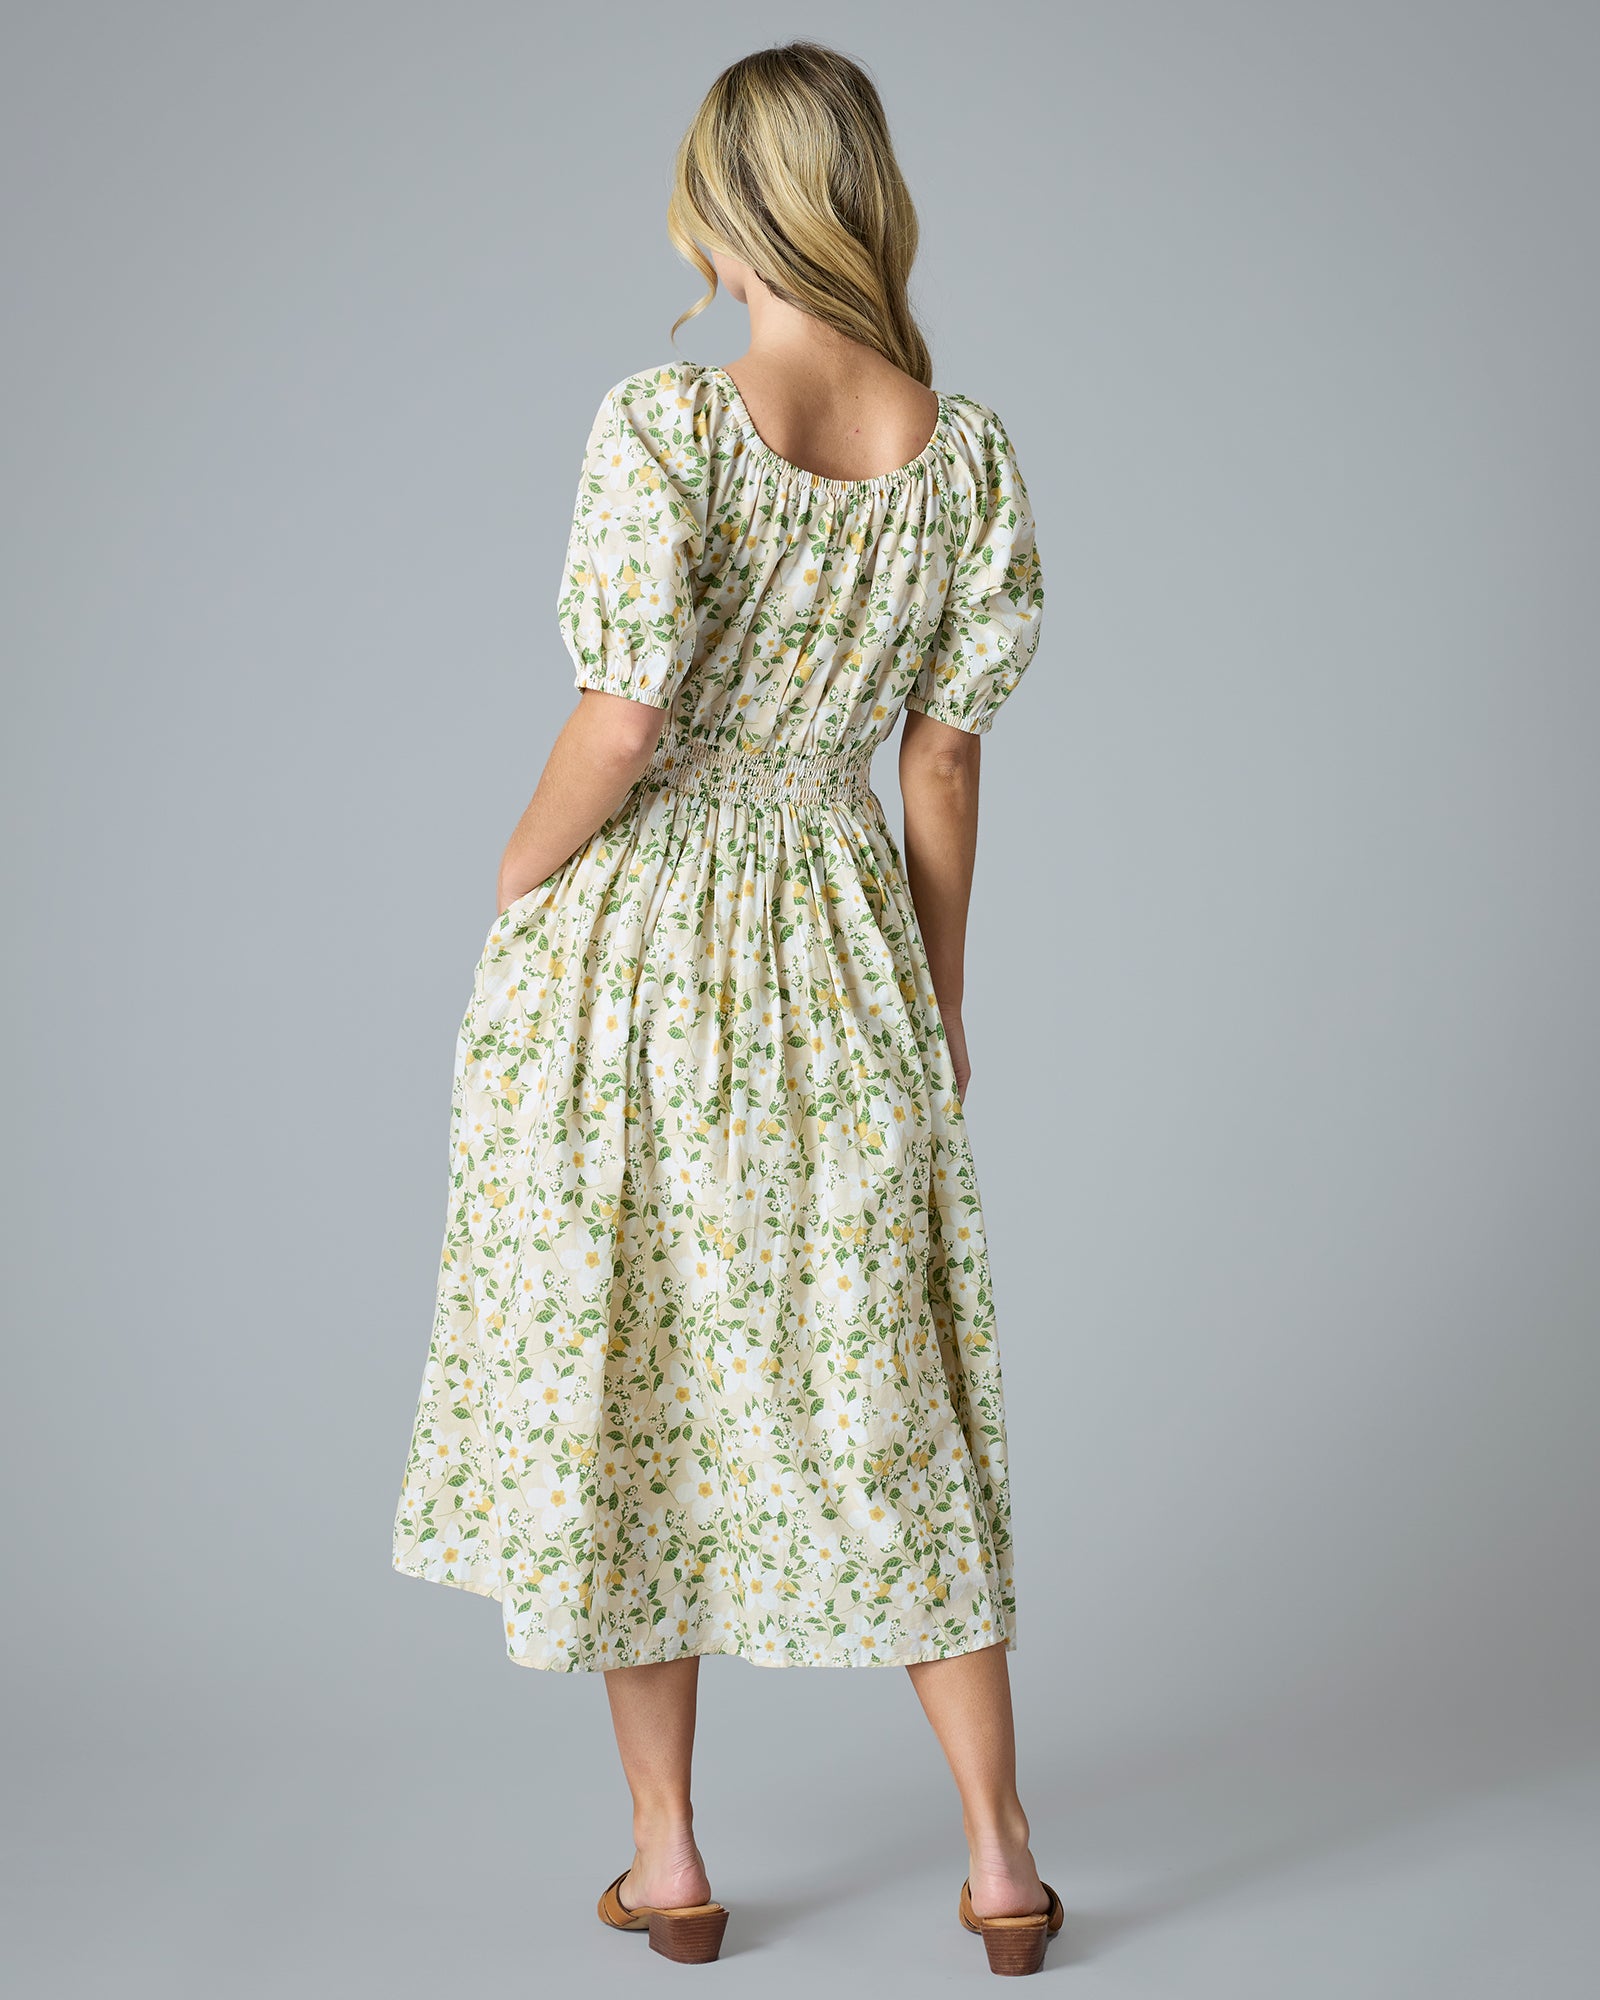 Woman in a green and yellow floral print dress that is midi-length with short sleeves